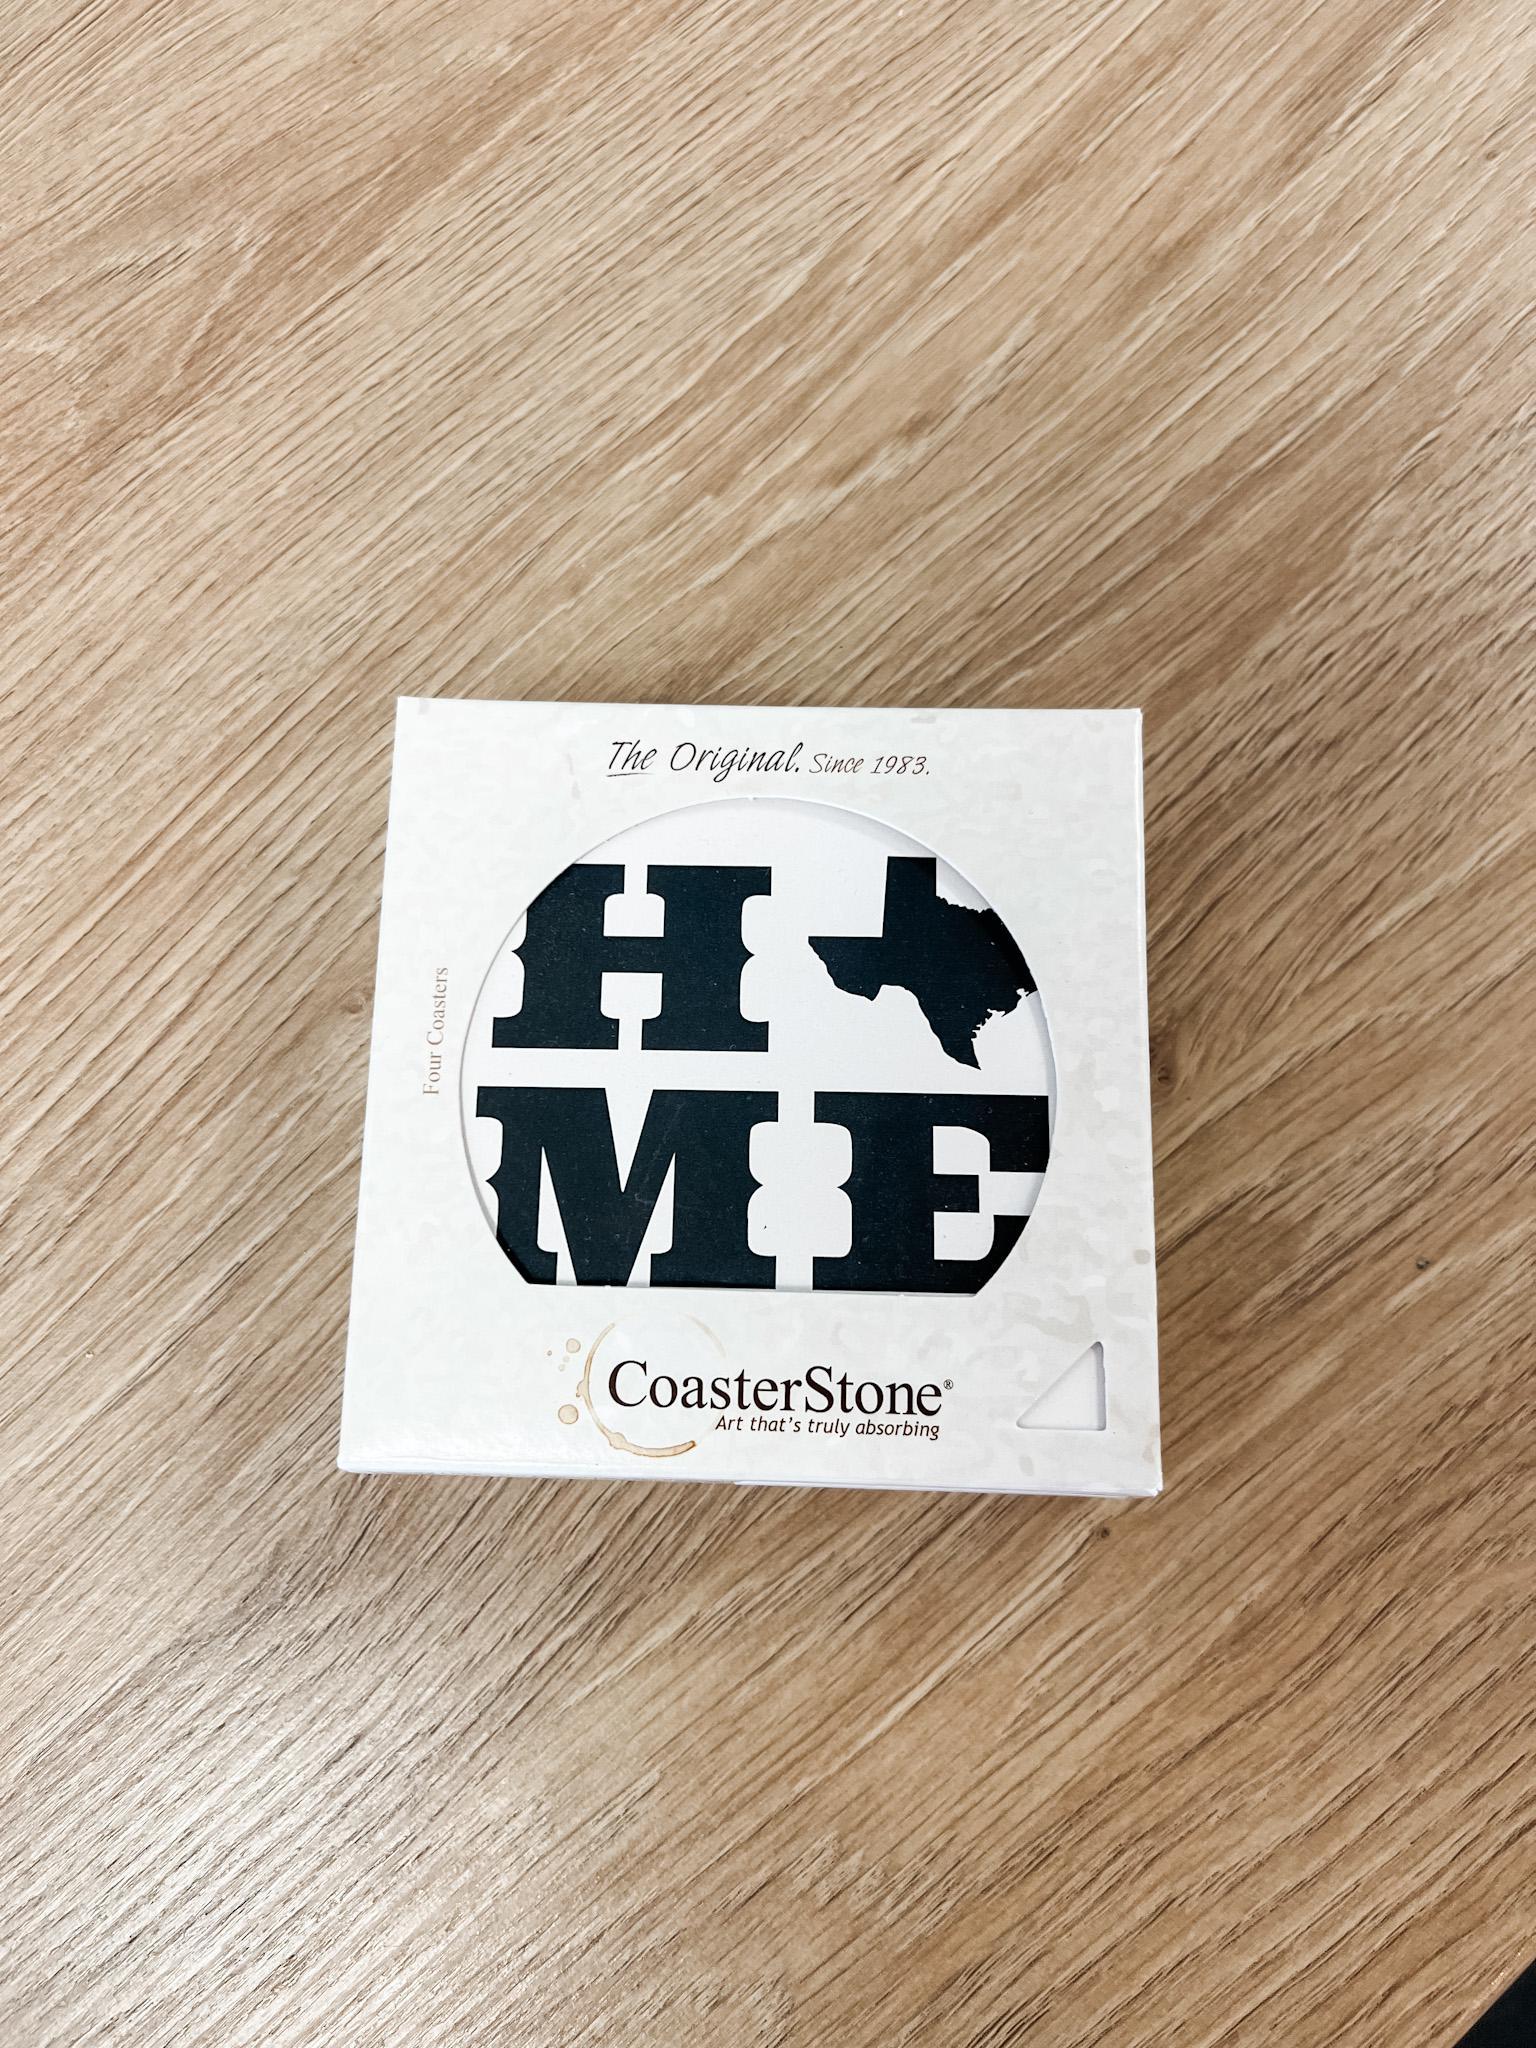 Texas is Home Square Coaster Set